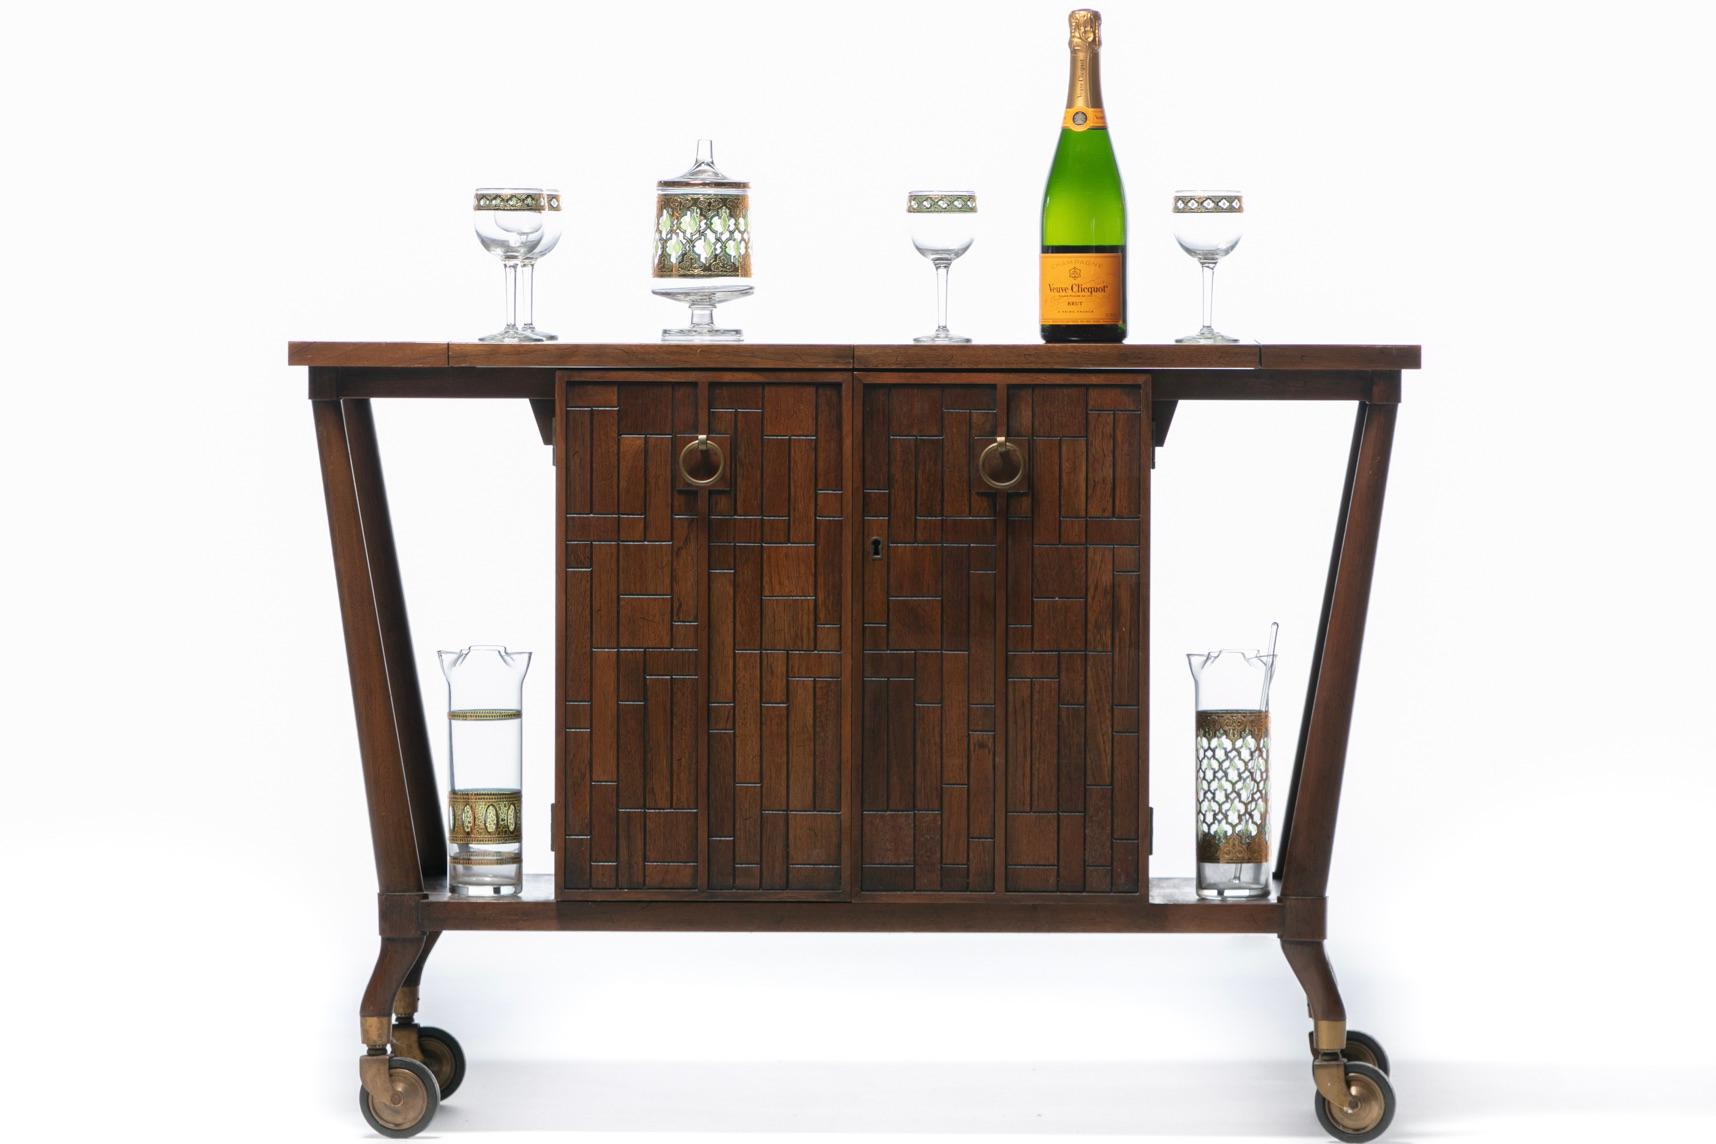 Forward Trend Brutalist Mid-Century Modern walnut bar cart designed by Bert England for Johnson Furniture circa 1960. This is a well known and admired Mid-Century Modern Brutalist bar cart represented in several early 1960s Architectural Digest